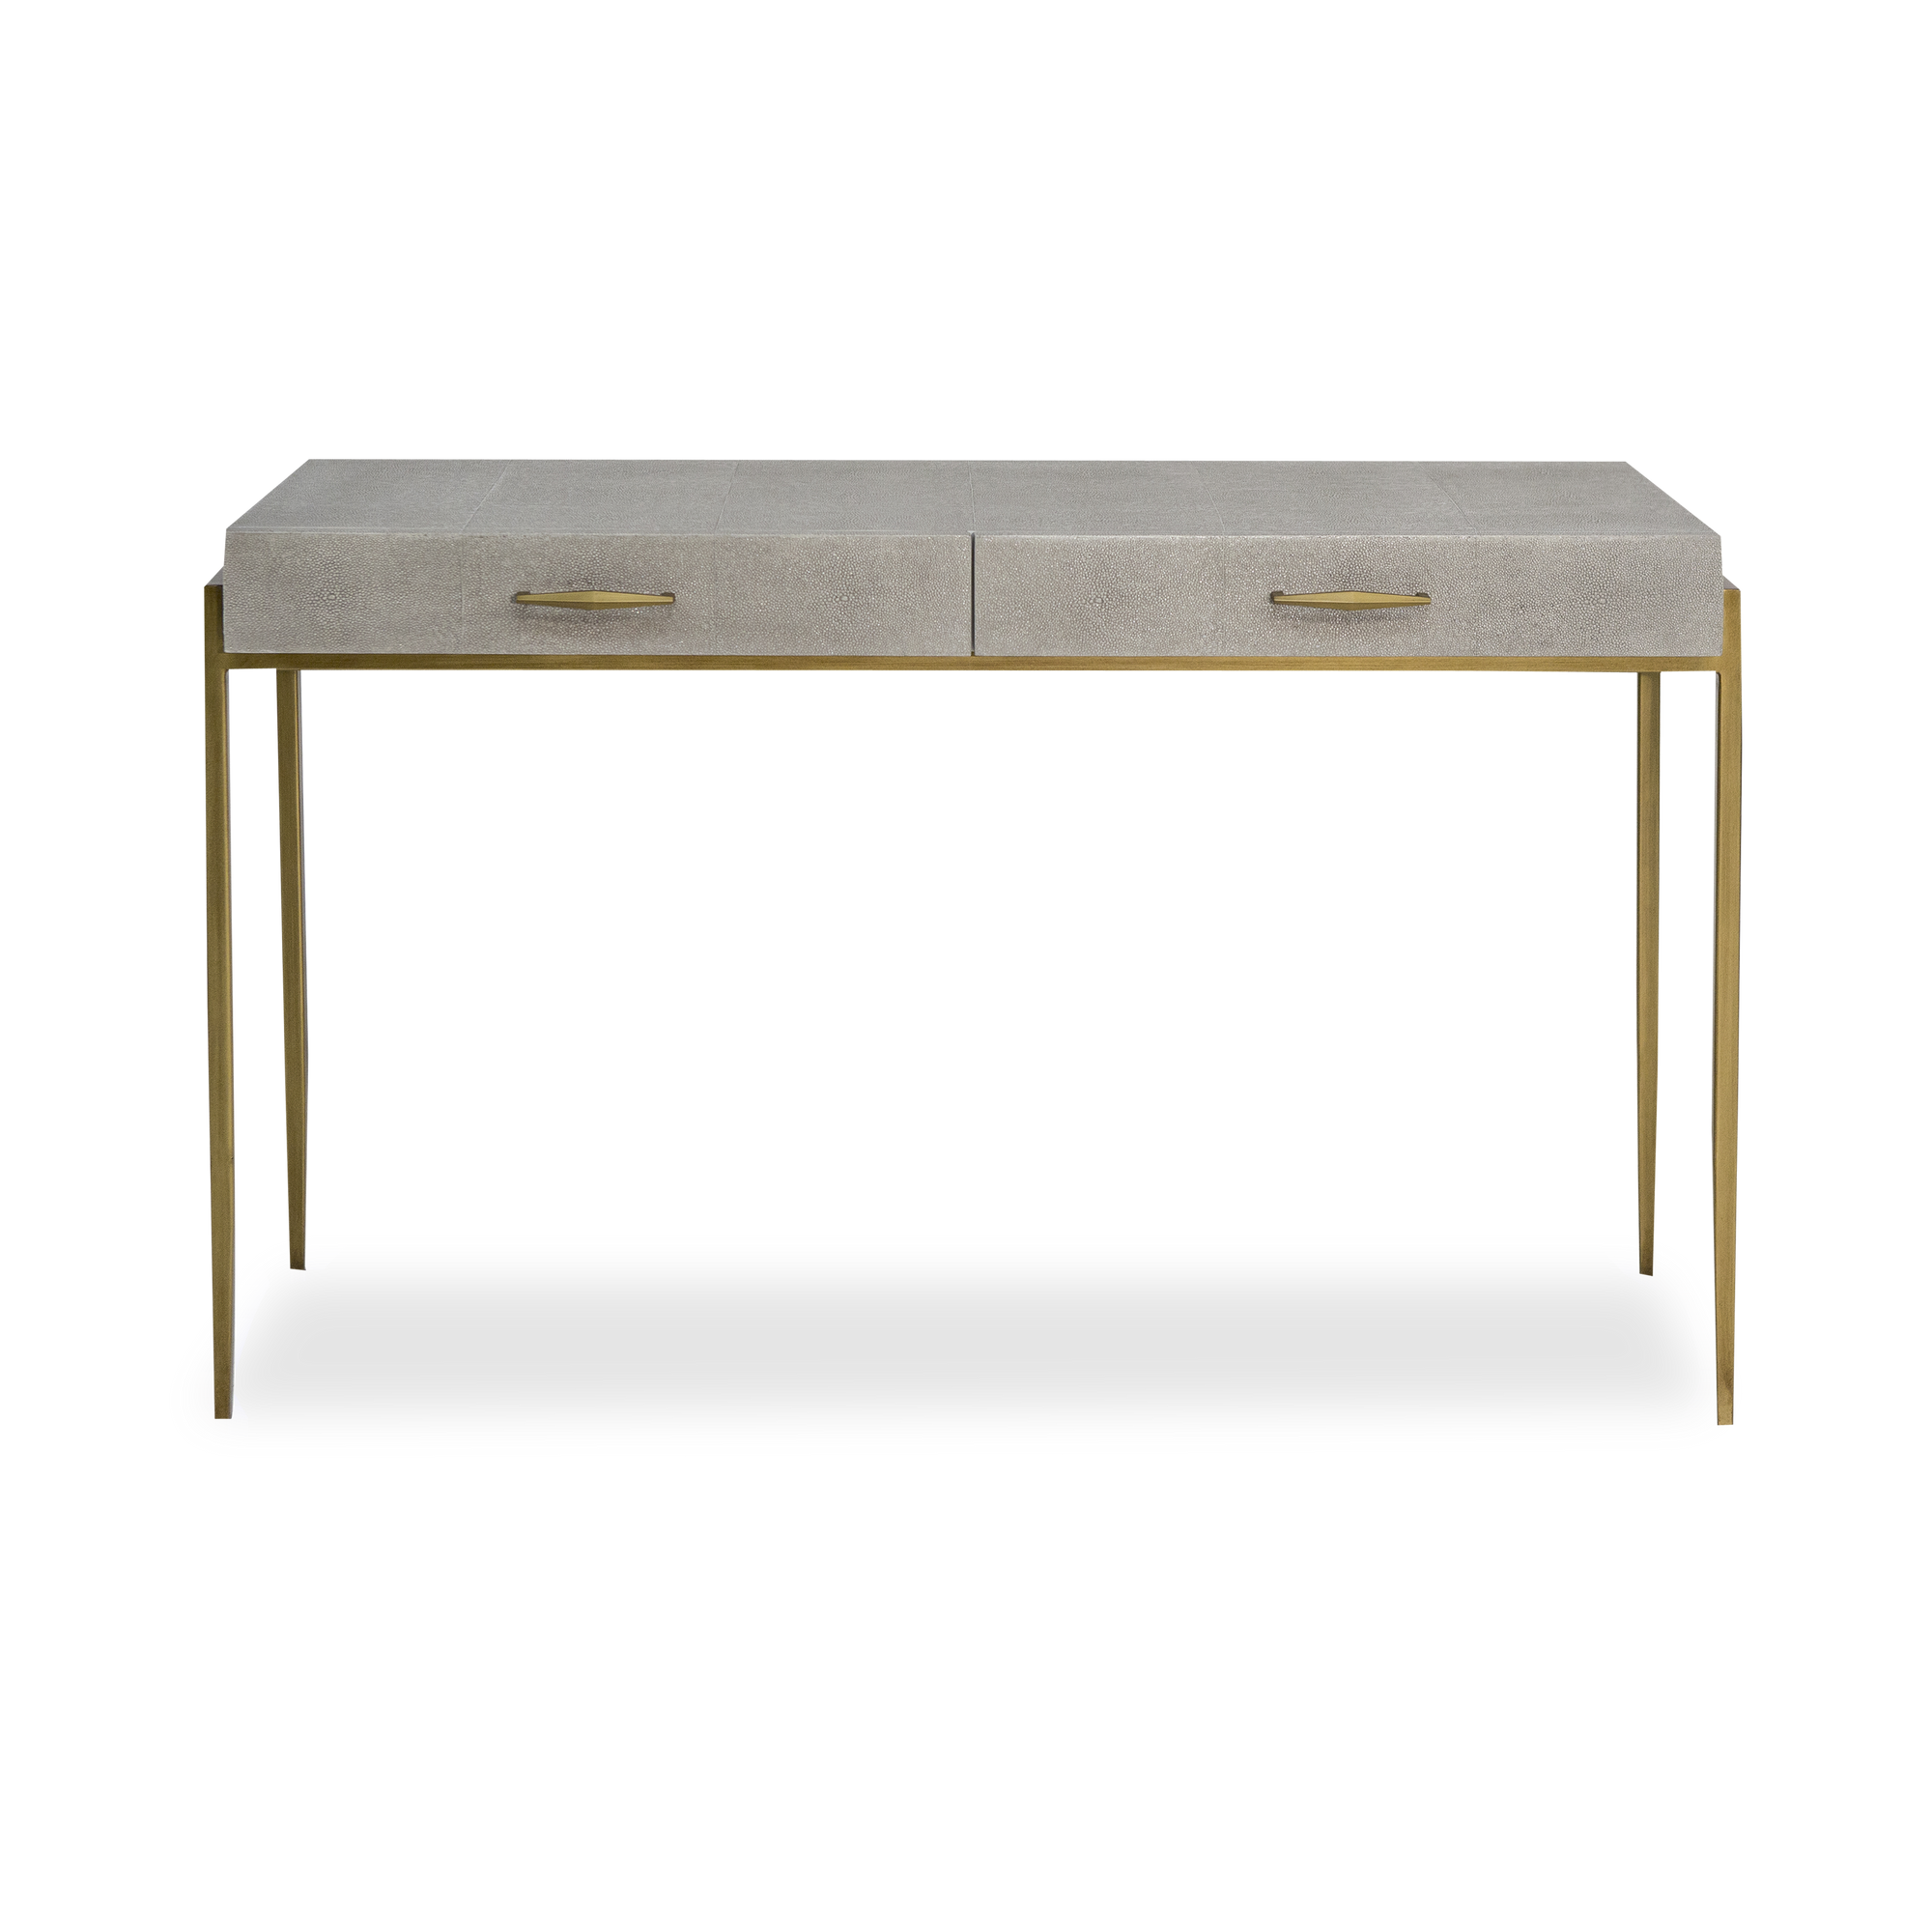 Full of rich texture, the Beckett Console Table adds a sophisticated glamour to your space.